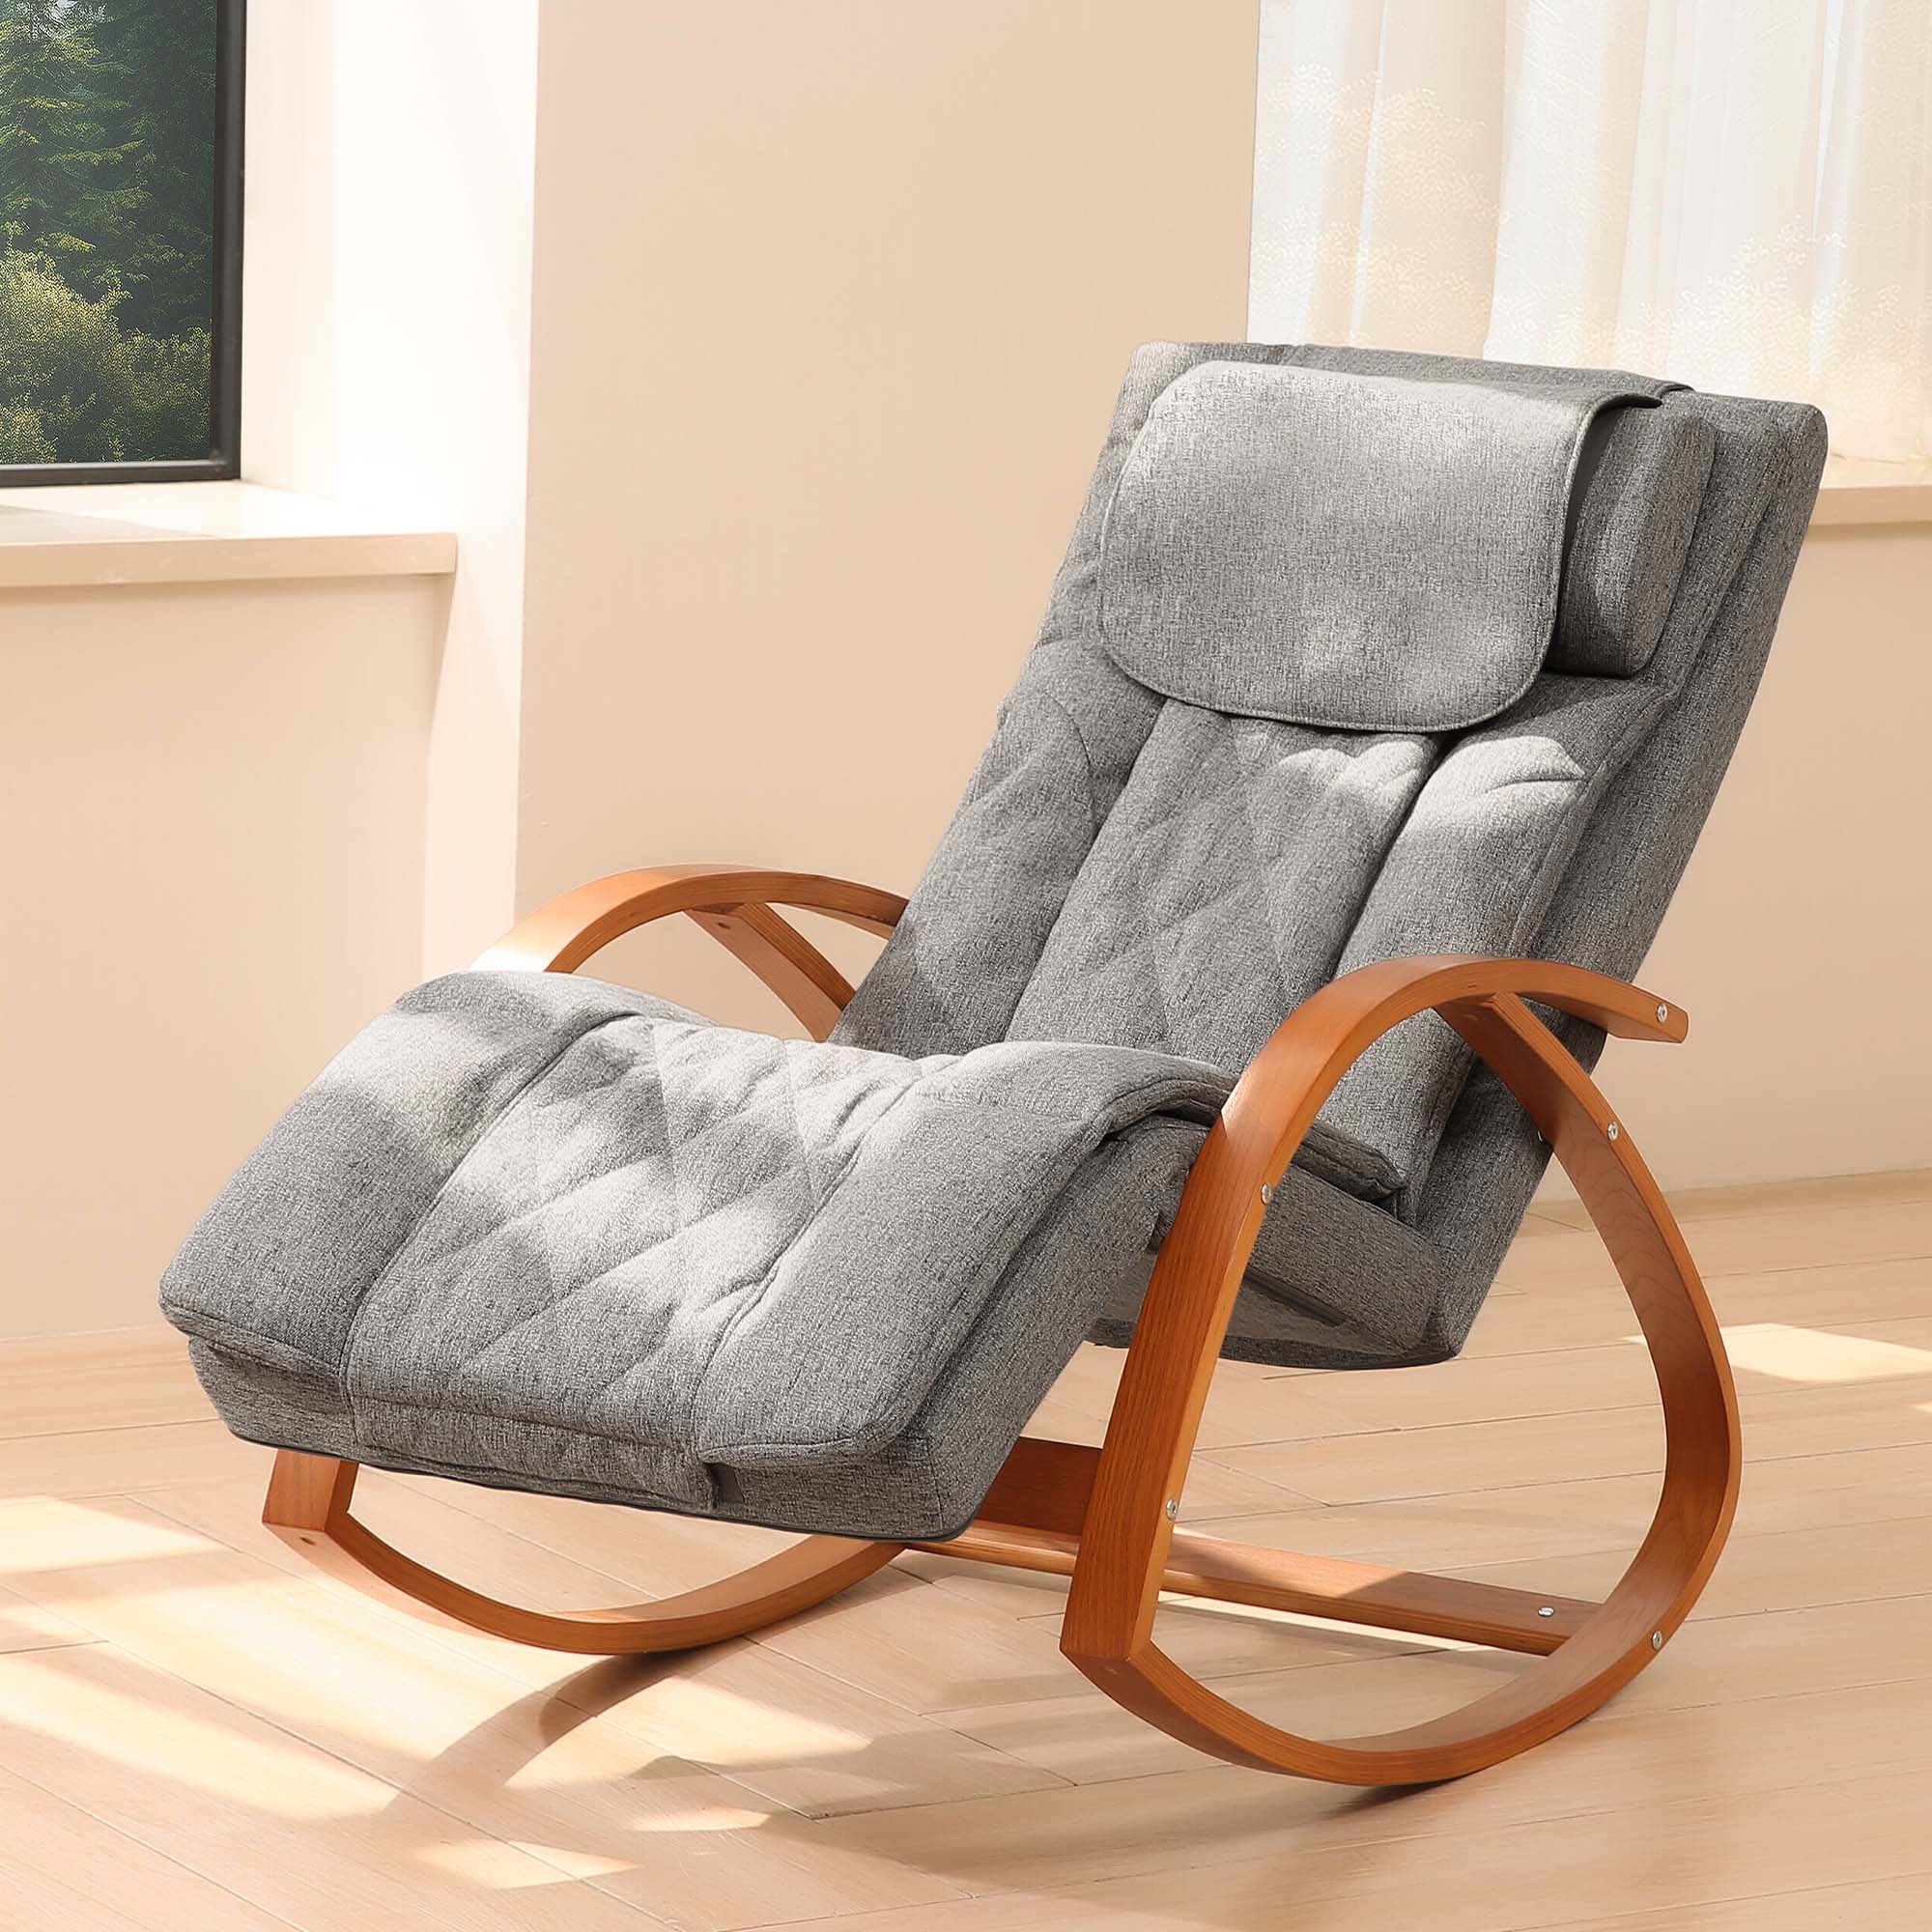 Load image into Gallery viewer, MARNUR Massage Rocking Chair Recliner with Vibration and Heat, Gray
